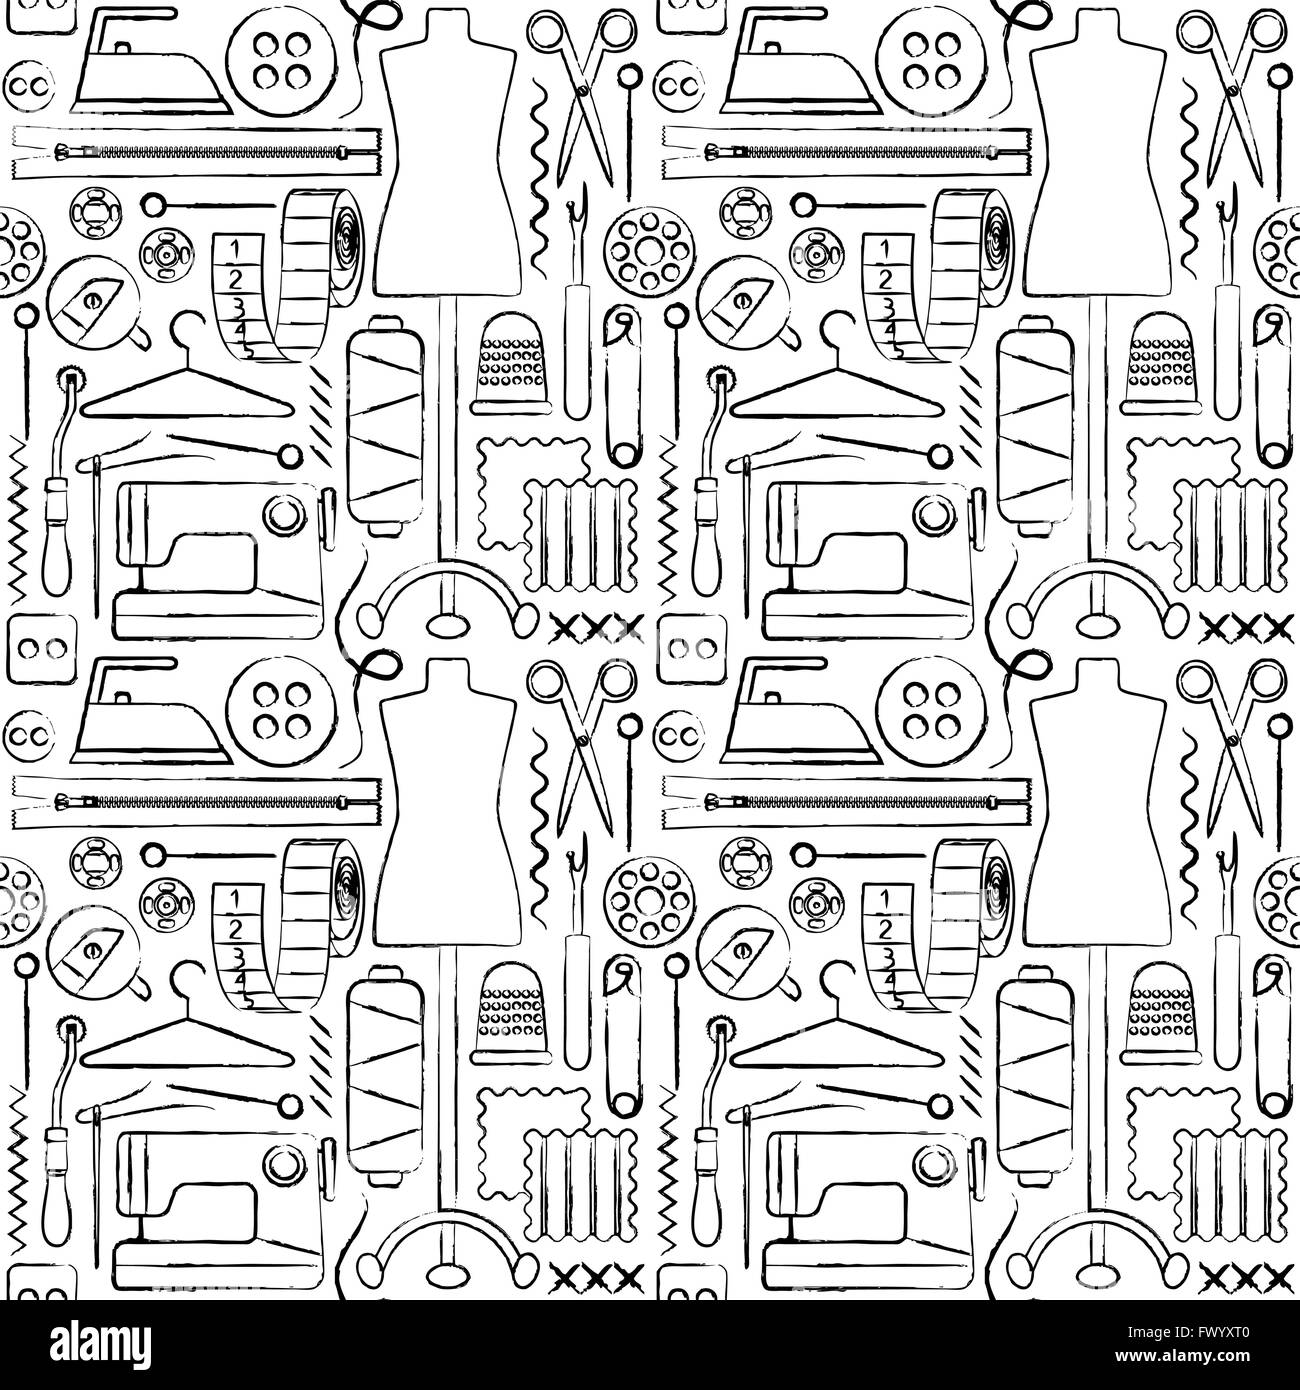 Sewing icons hand drawn seamless pattern background Stock Vector